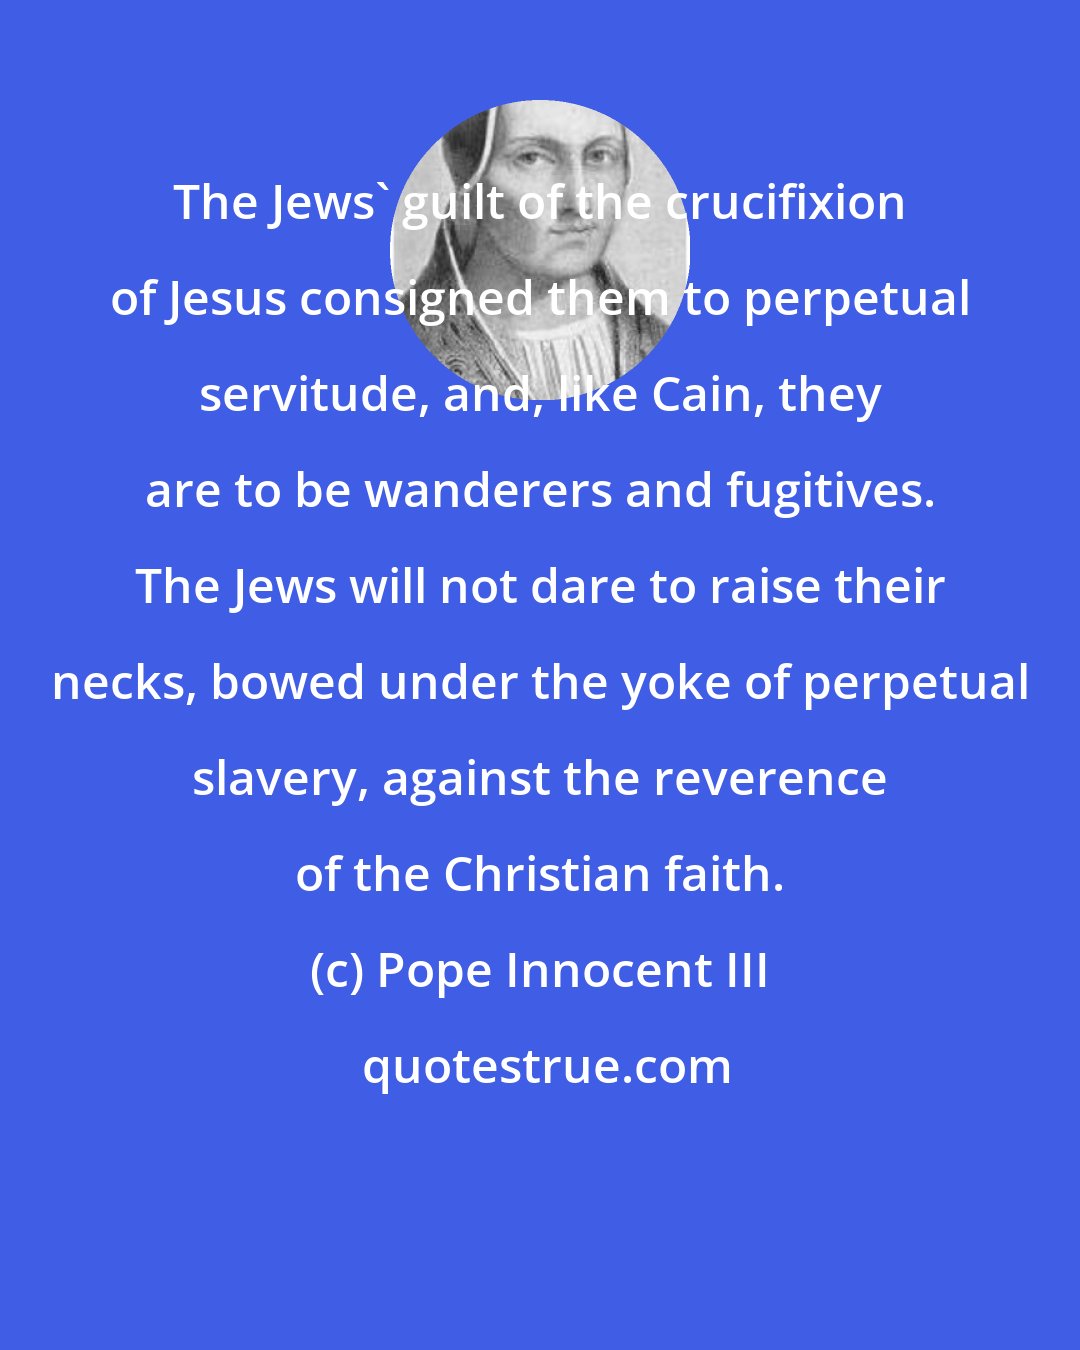 Pope Innocent III: The Jews' guilt of the crucifixion of Jesus consigned them to perpetual servitude, and, like Cain, they are to be wanderers and fugitives. The Jews will not dare to raise their necks, bowed under the yoke of perpetual slavery, against the reverence of the Christian faith.